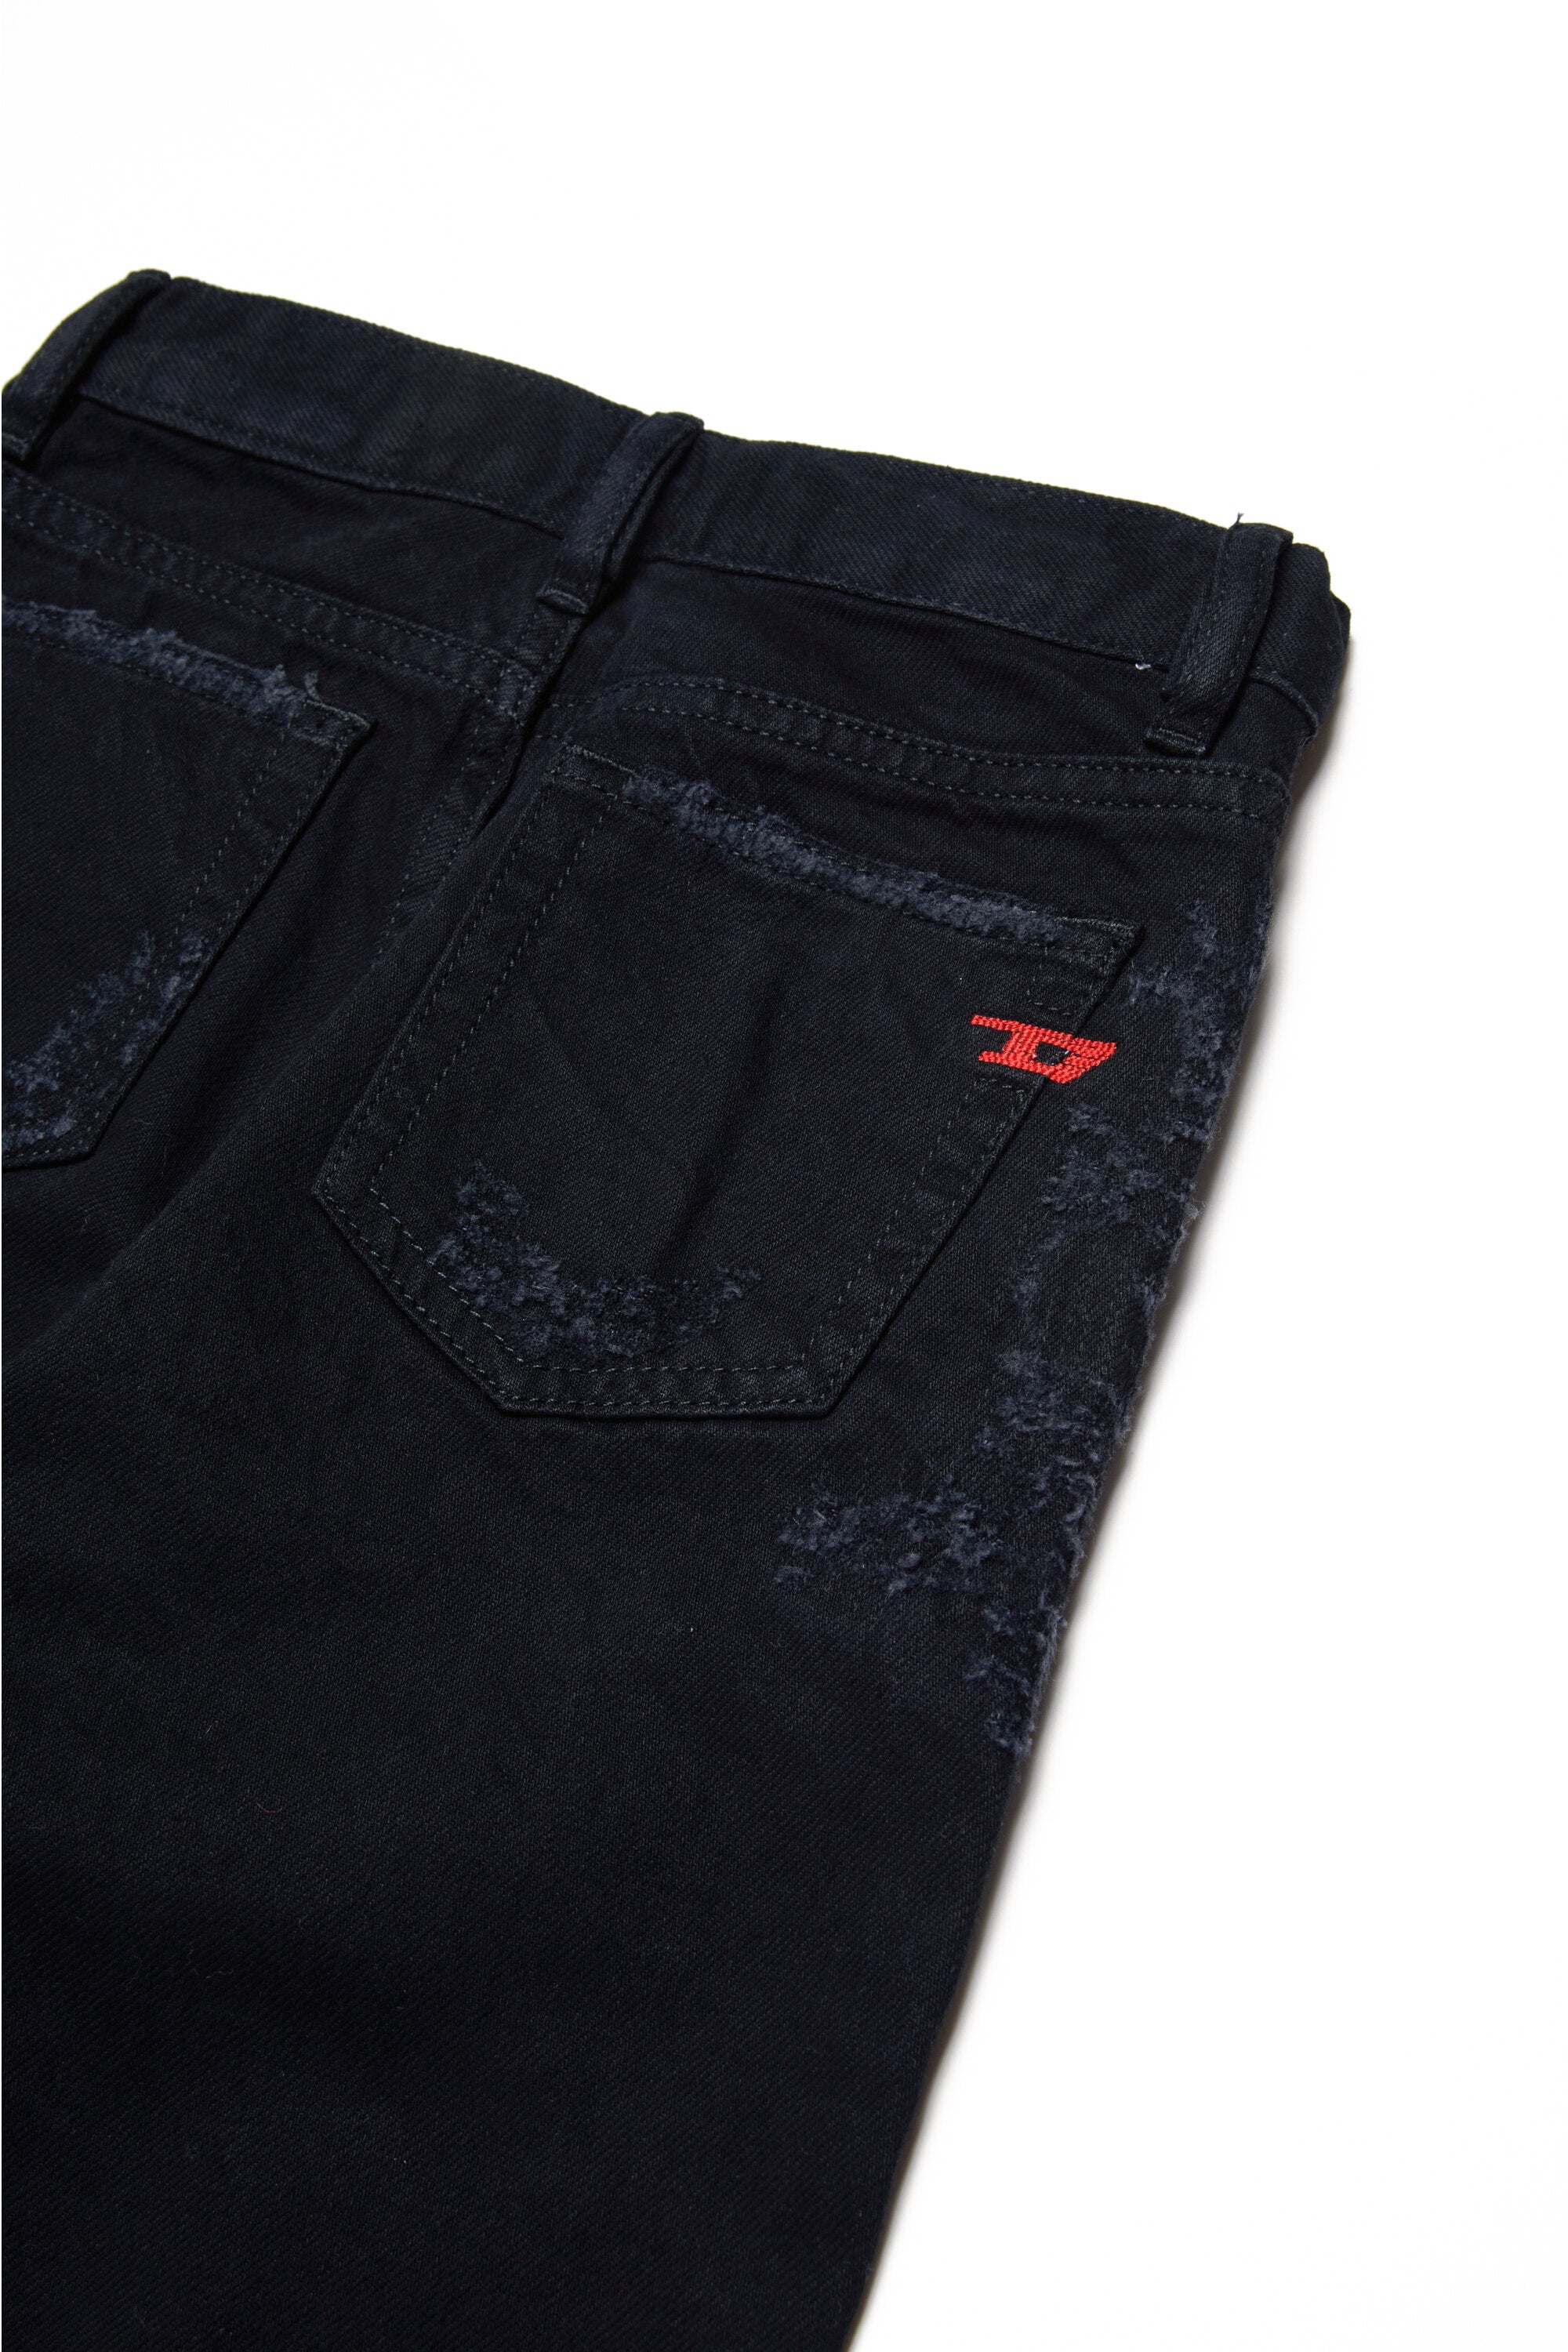 Black straight jeans with abrasions - 2020 D-Viker